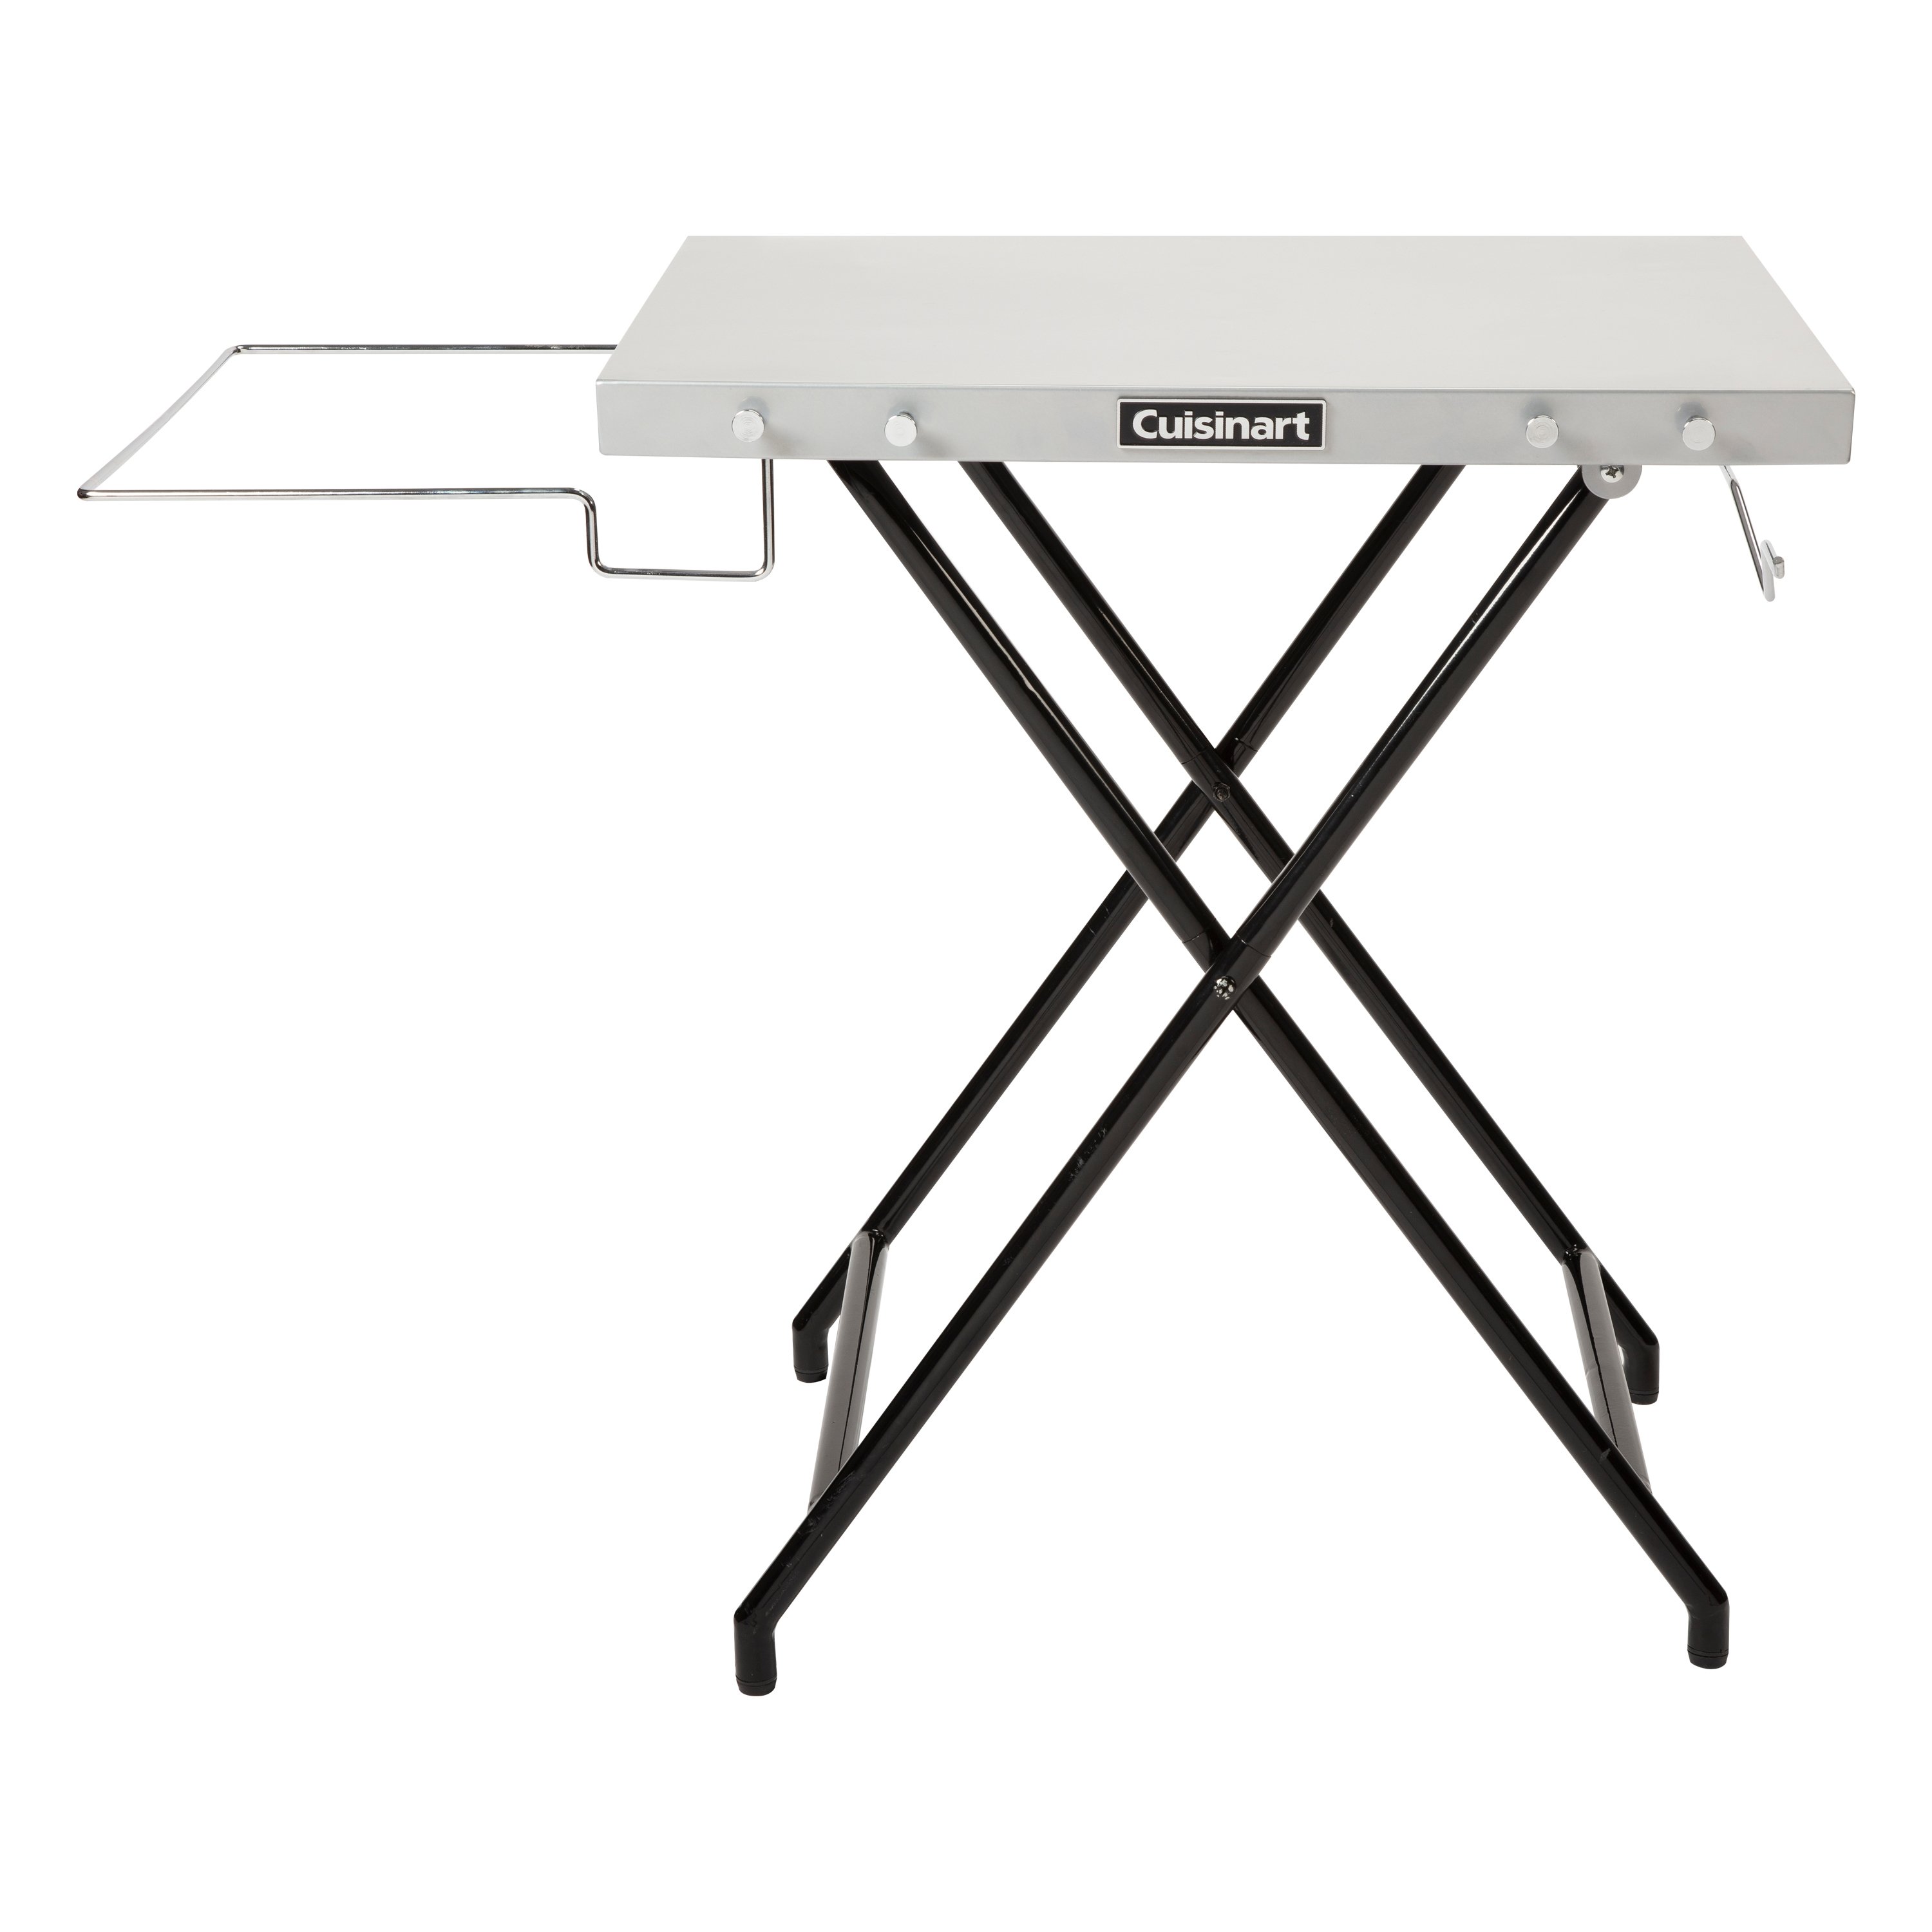 Cuisinart Cfgs-150 Folding Portable Grill Stand